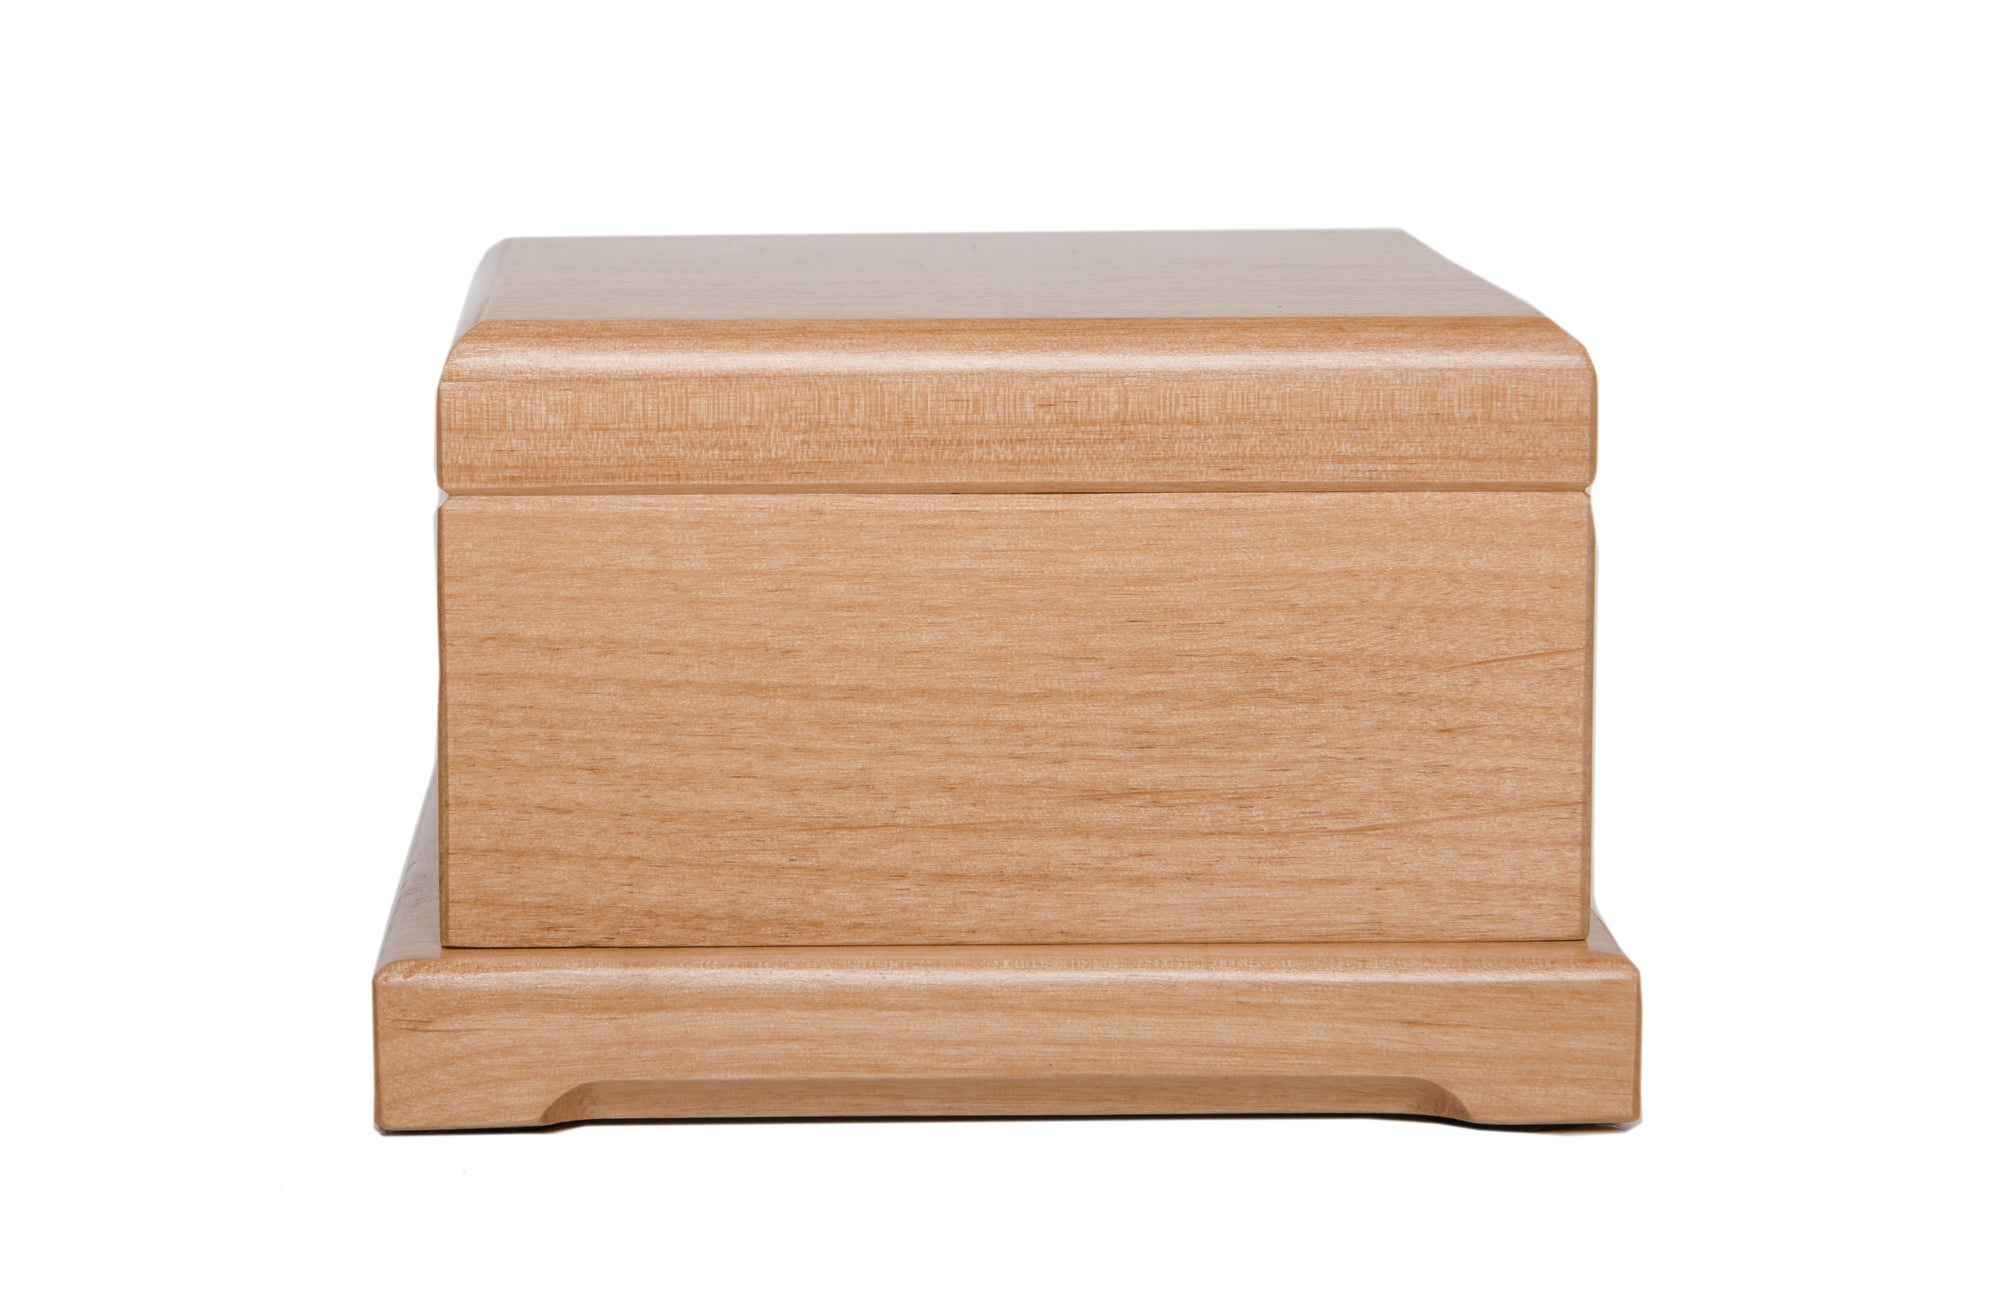 Pet Memorial Keepsake Urn Box for Dog or Cat - You Left Your Paw Prints